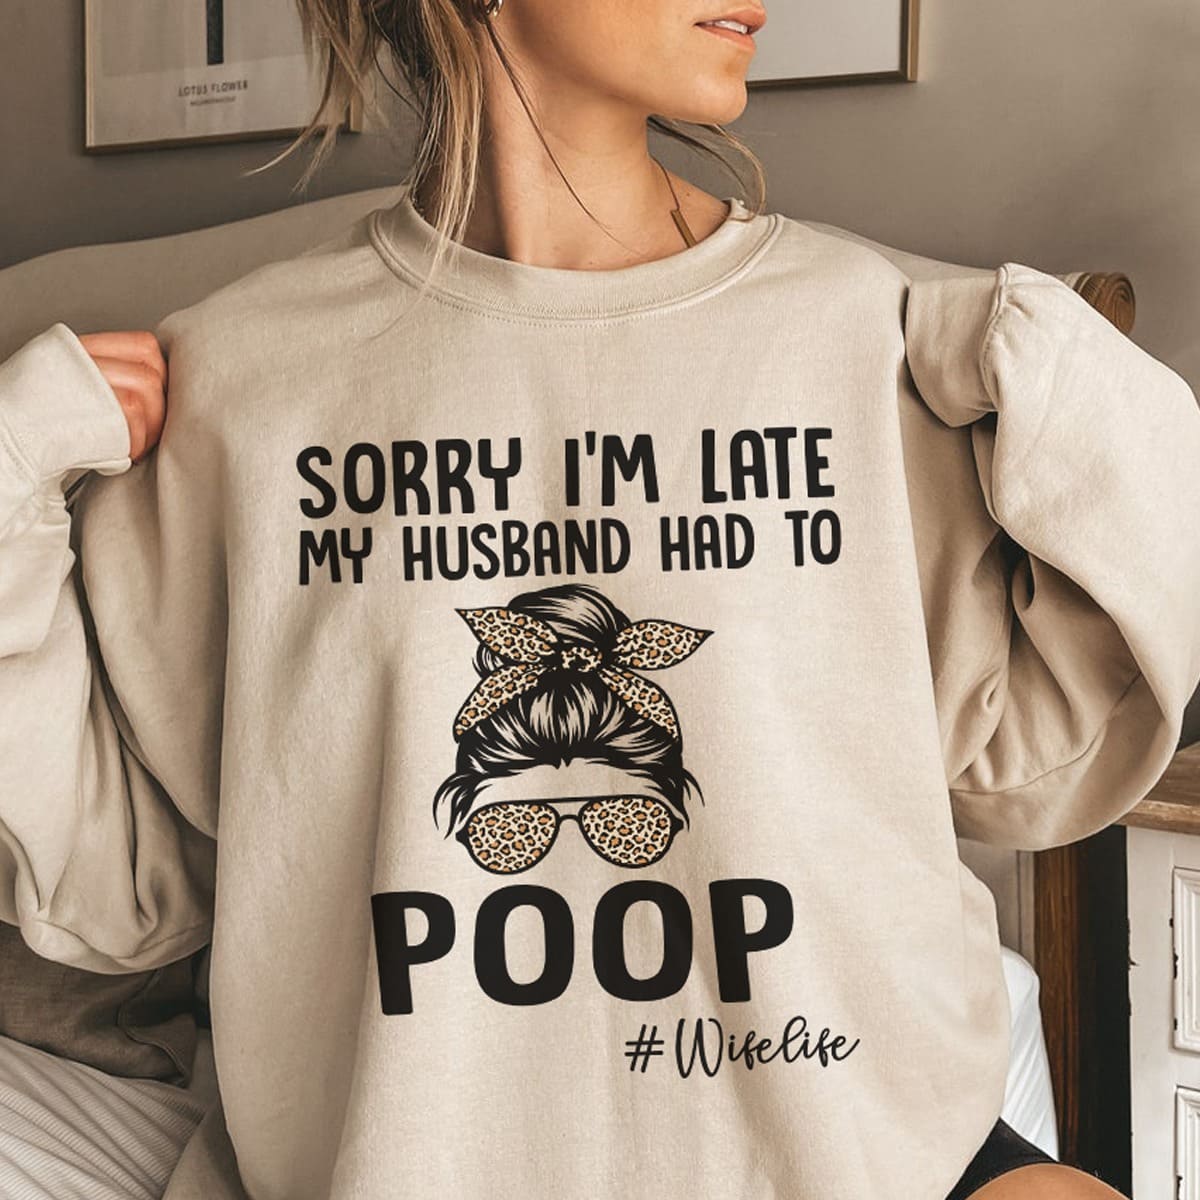 Wife Face - Sorry i'm late my husband had to poop